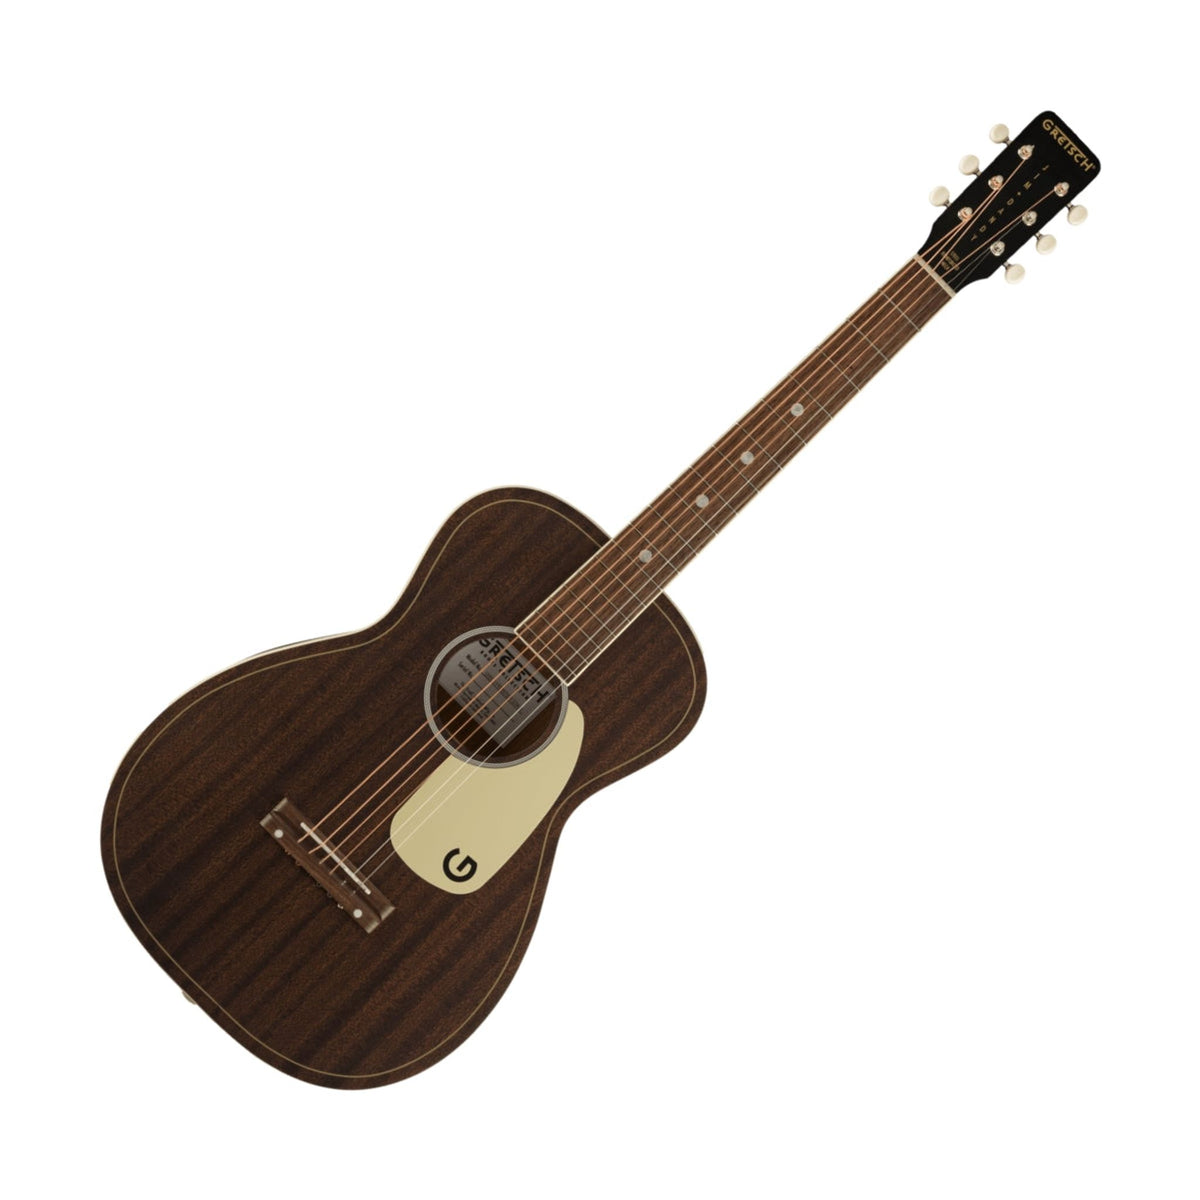 The Gretsch G9500 Jim Dandy Parlor Acoustic Guitar is faithful to the Gretsch® “Rex” parlor guitars of the 1930s, ‘40s and ‘50s, the G9500 Jim Dandy™ Flat Top parlor-style model embodies everything that was great about everyone’s first guitar.